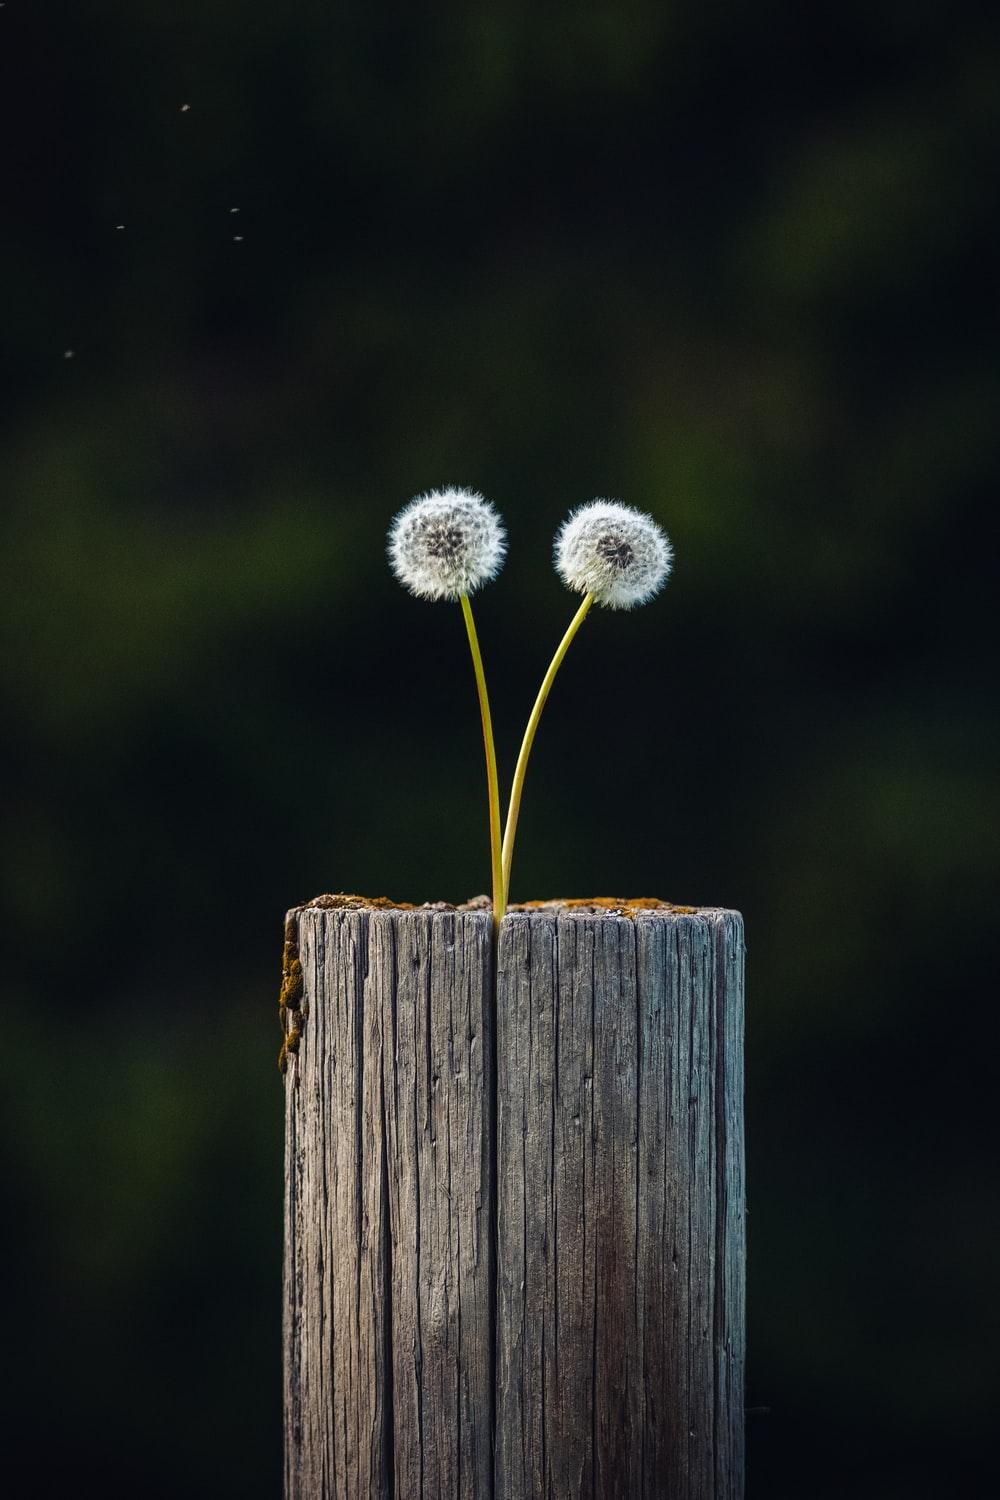 Two white petaled flowers on top of the wooden post - Dandelions